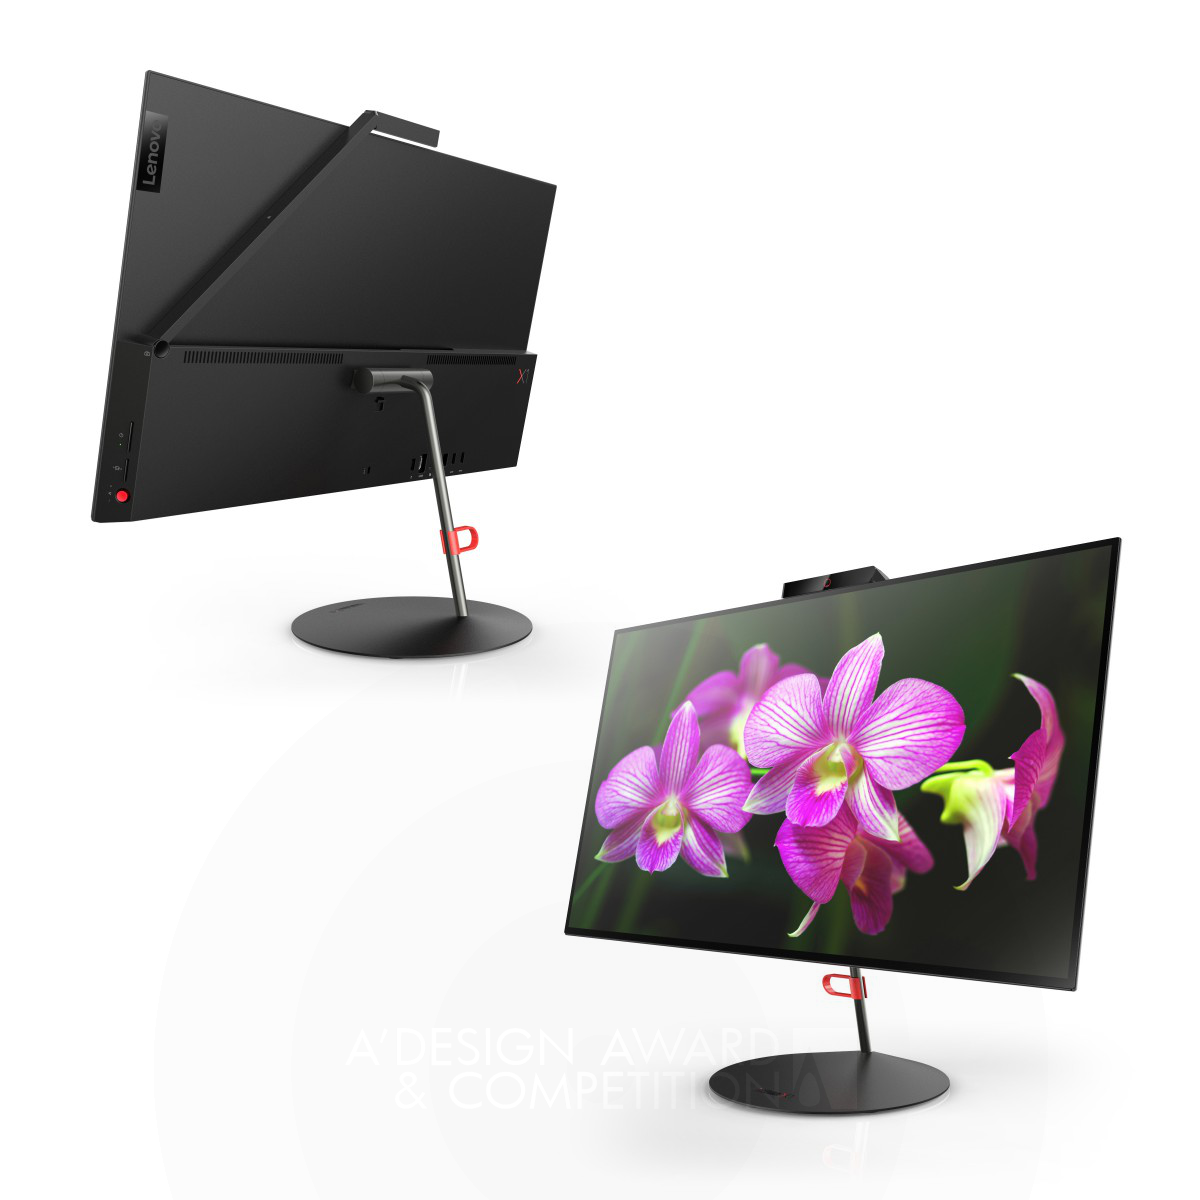 ThinkVision X1 Computer Monitor by Lenovo Design Group